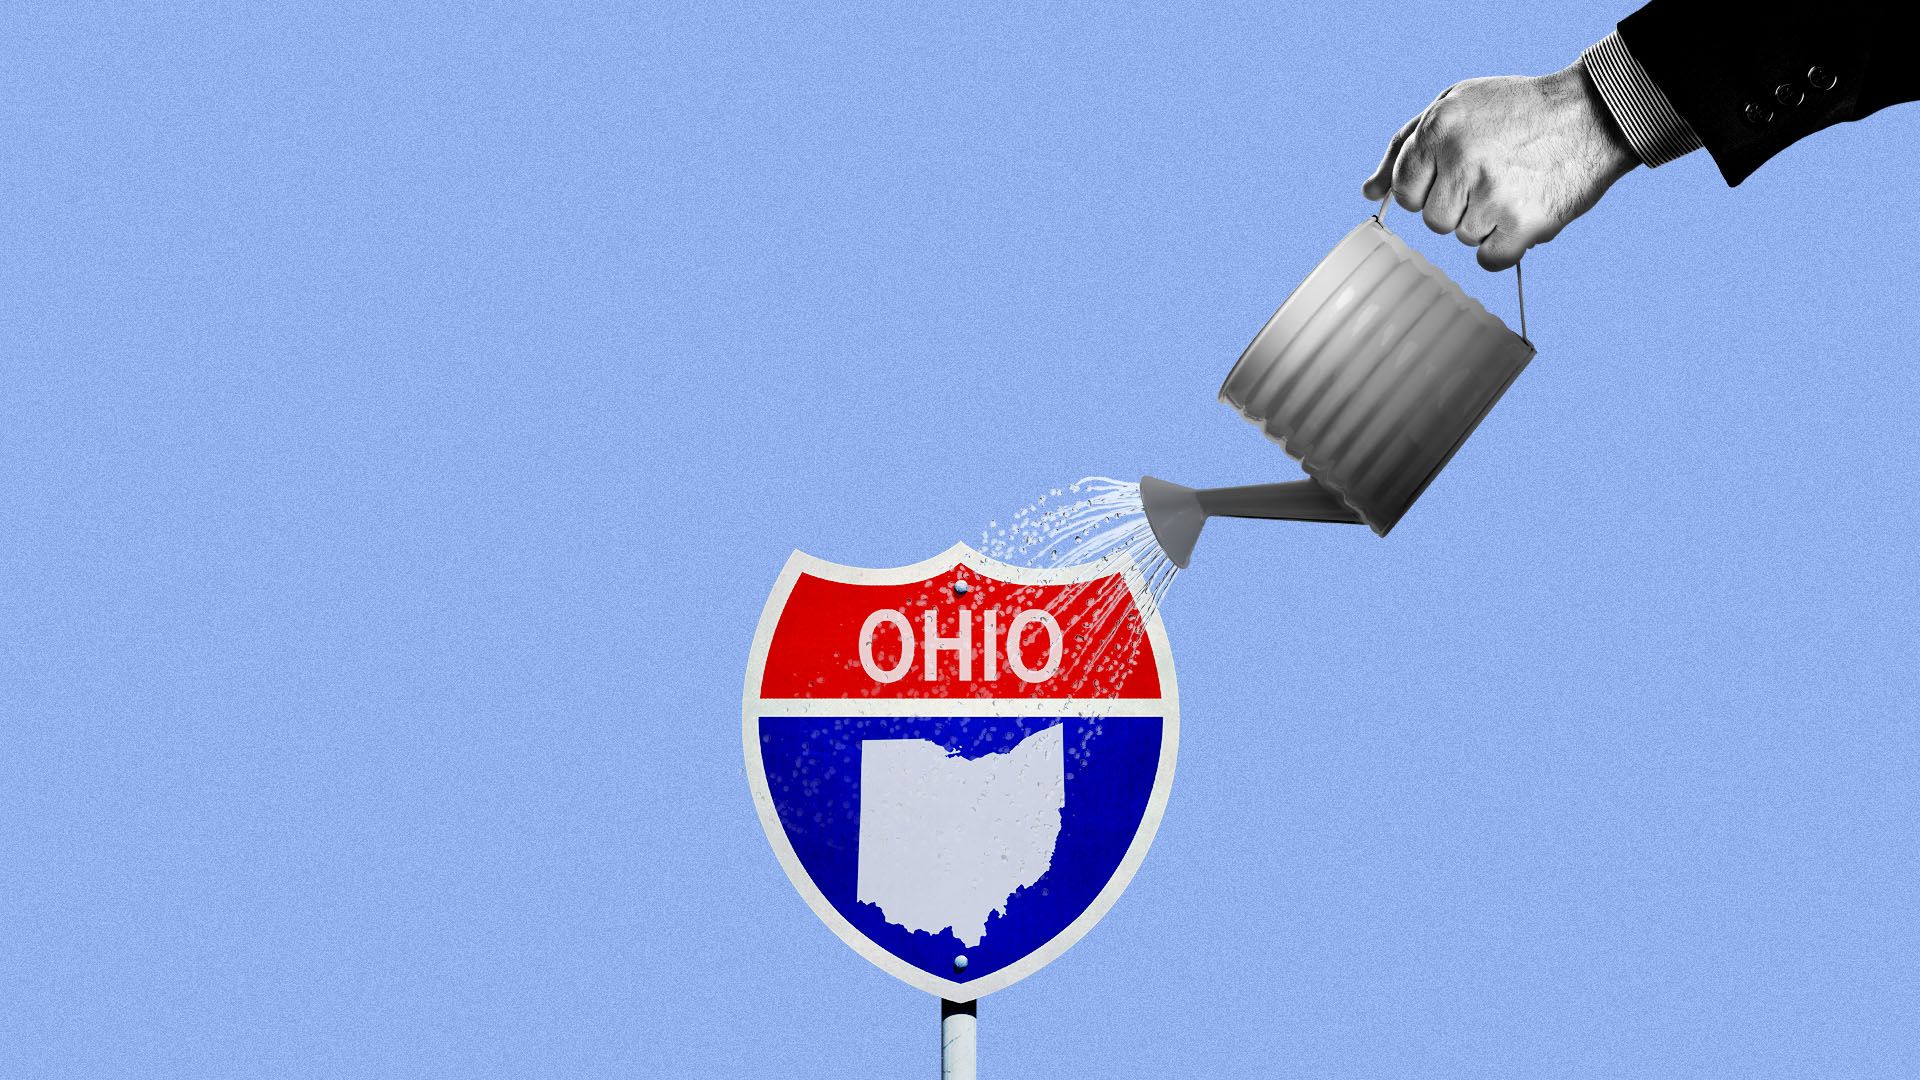 Illustration of an Ohio interstate sign being watered by a hand in a suit